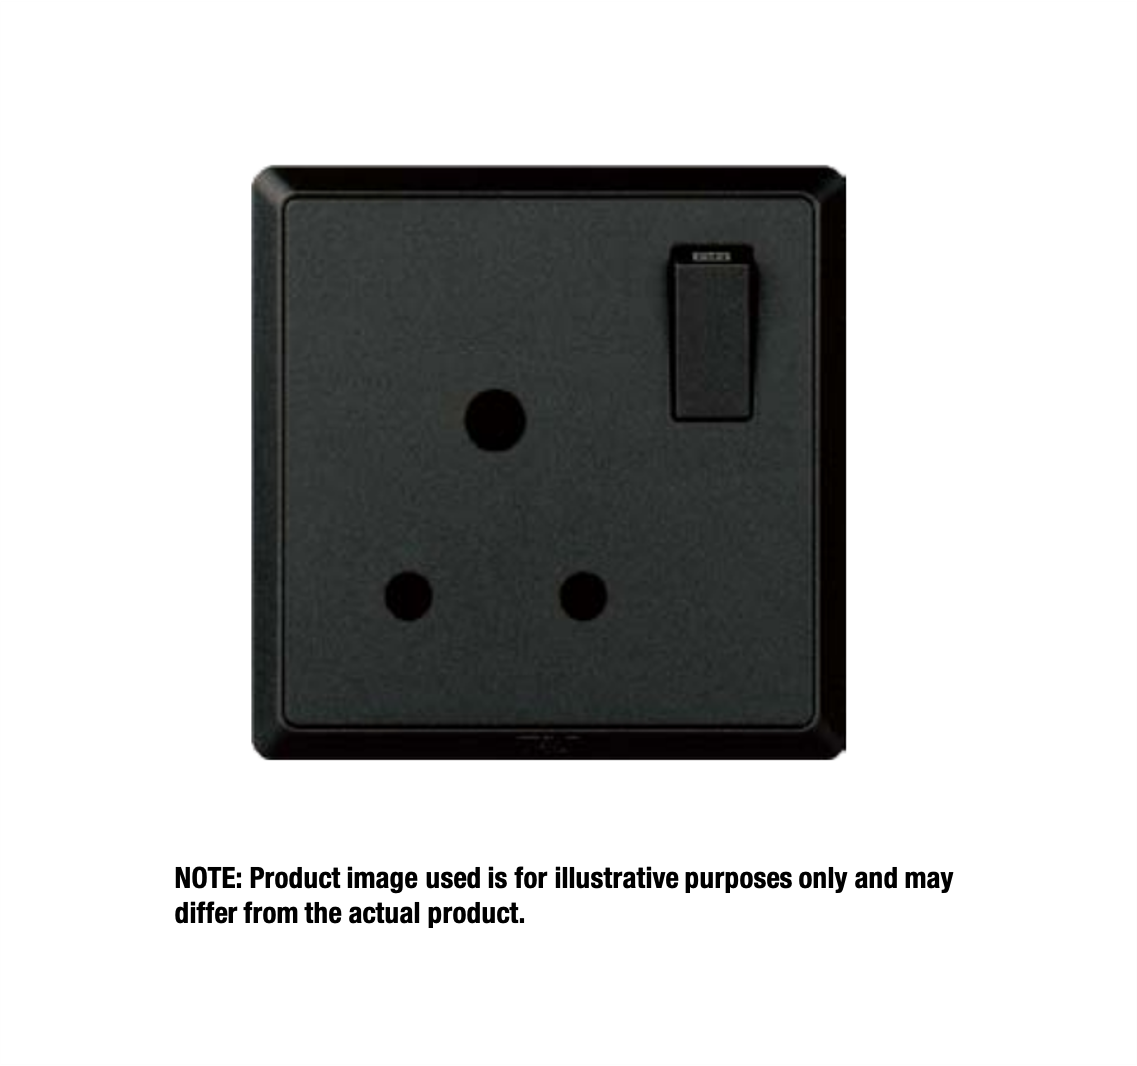 INFINIT - 32A 1 Gang Double Pole Switch with LED Indicator (Charcoal Black)